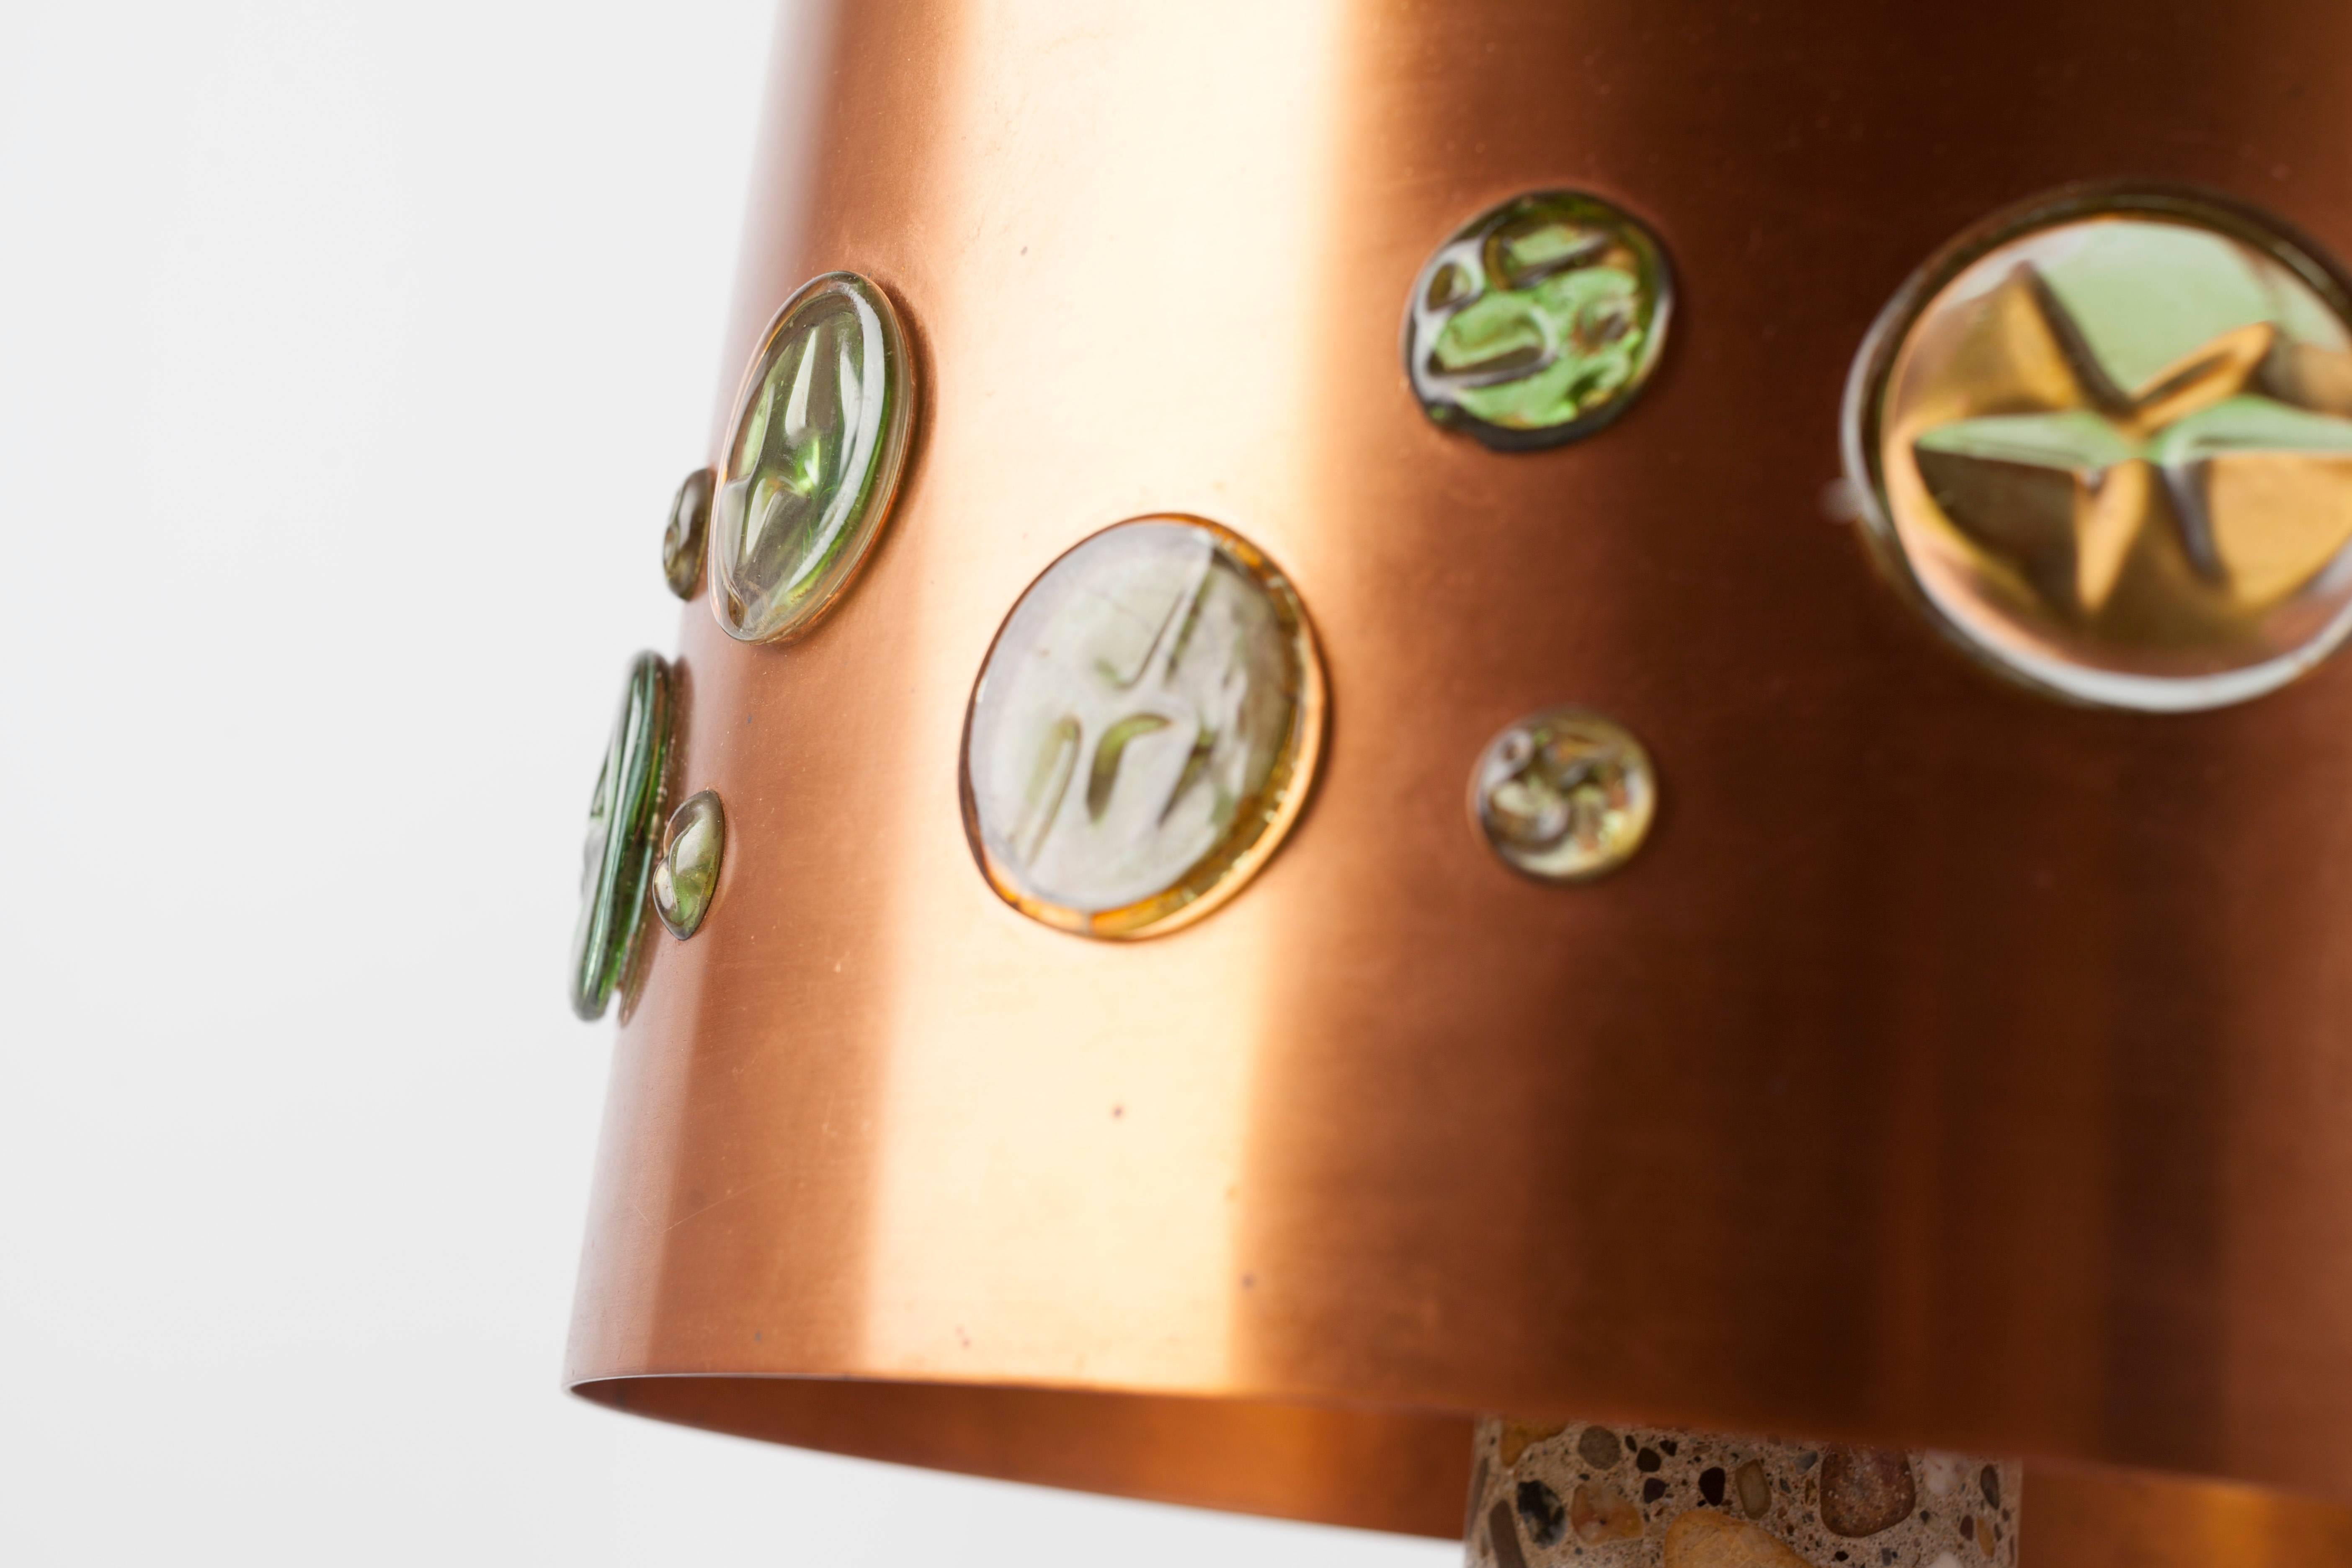 Table lamp designed by Nanny Still for RAAK, Amsterdam. Rare and very heavy piece.

The round base is made of black marble (diameter 23 cm / appr. 9 inches) carrying a terrazzo stick that is topped by a shade made of copper with multicolored glass